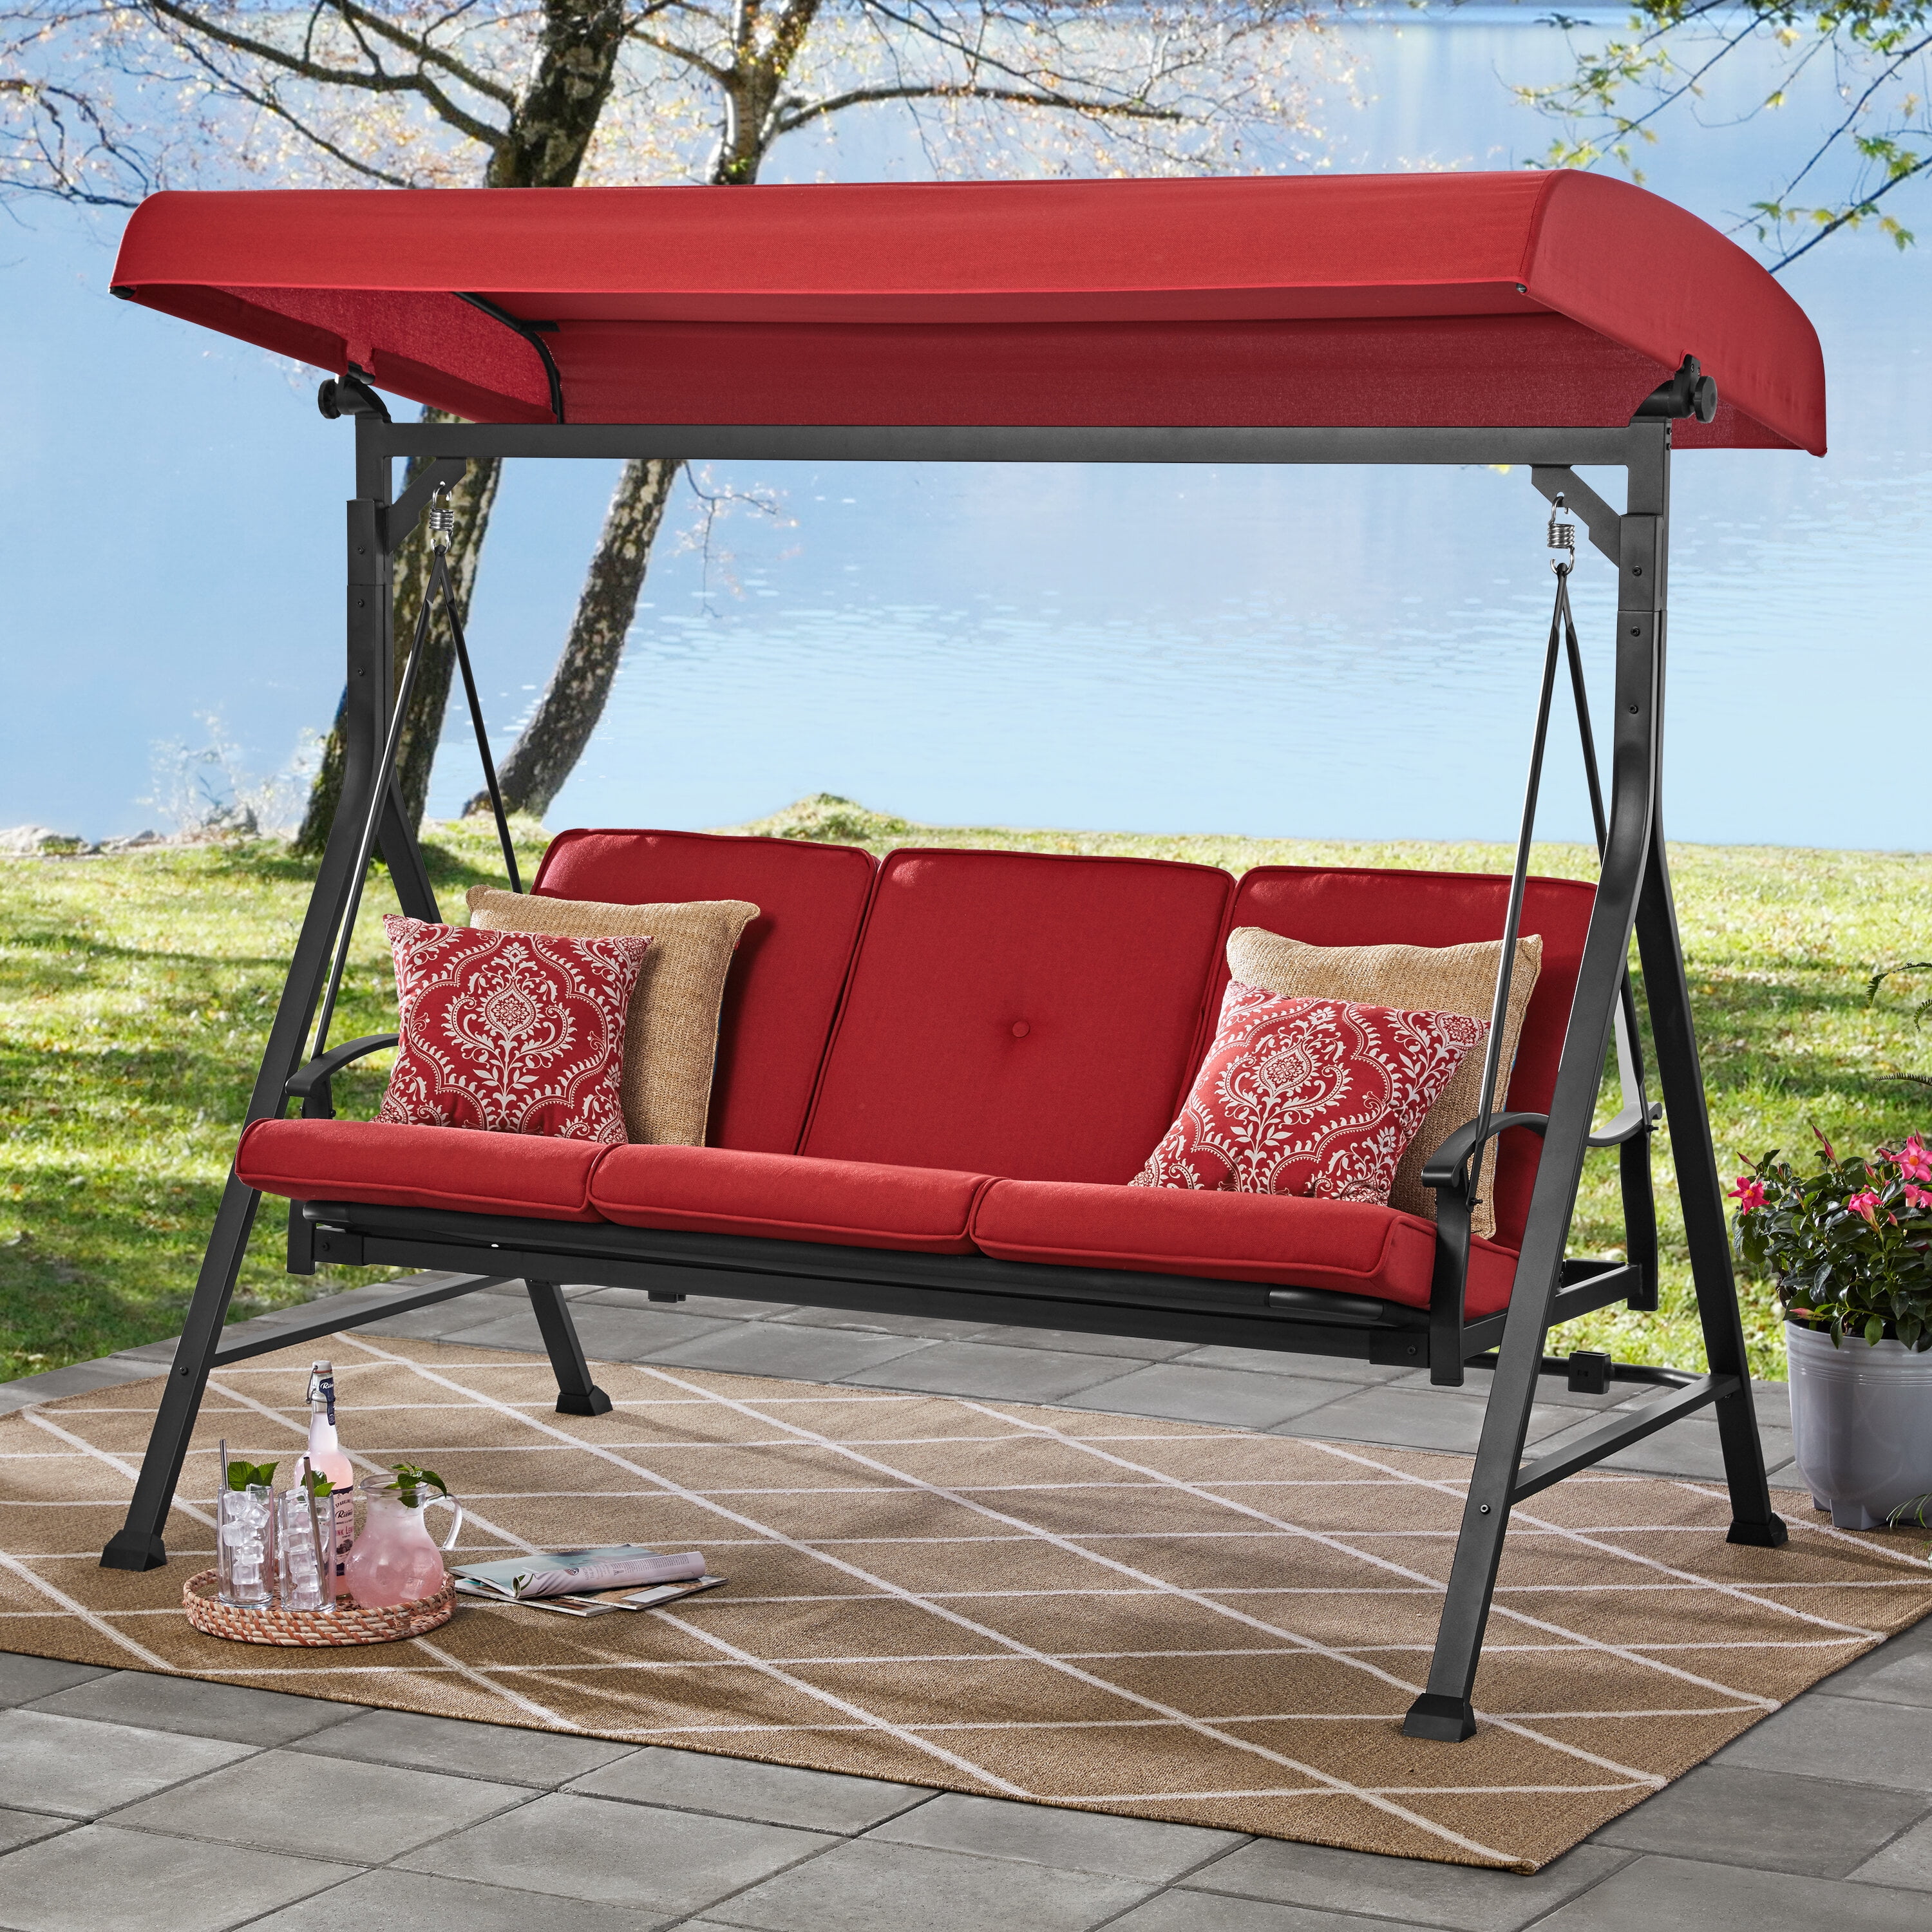 Mainstays Belden Park 3 Person Seat Outdoor Furniture Patio Swing and Daybed with Canopy, Red